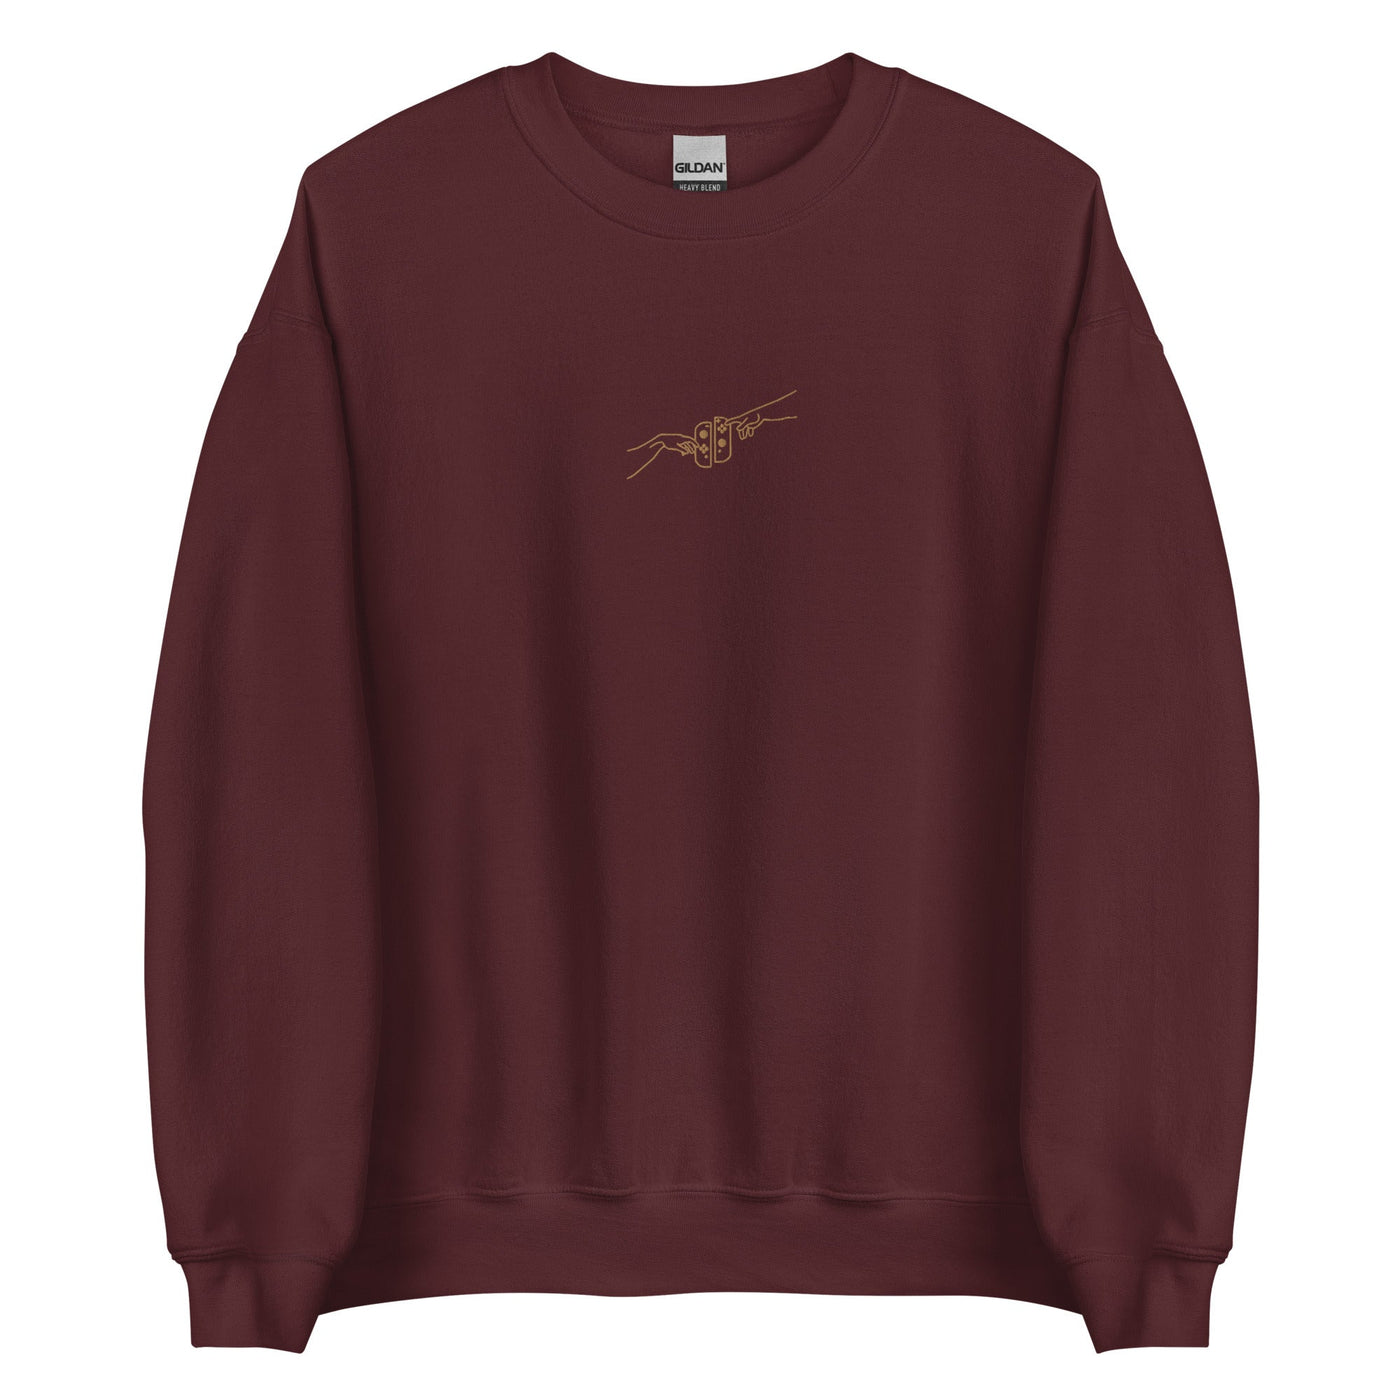 The Creation of Switch | Embroidered Unisex Sweatshirt | Cozy Gamer Threads and Thistles Inventory Maroon S 